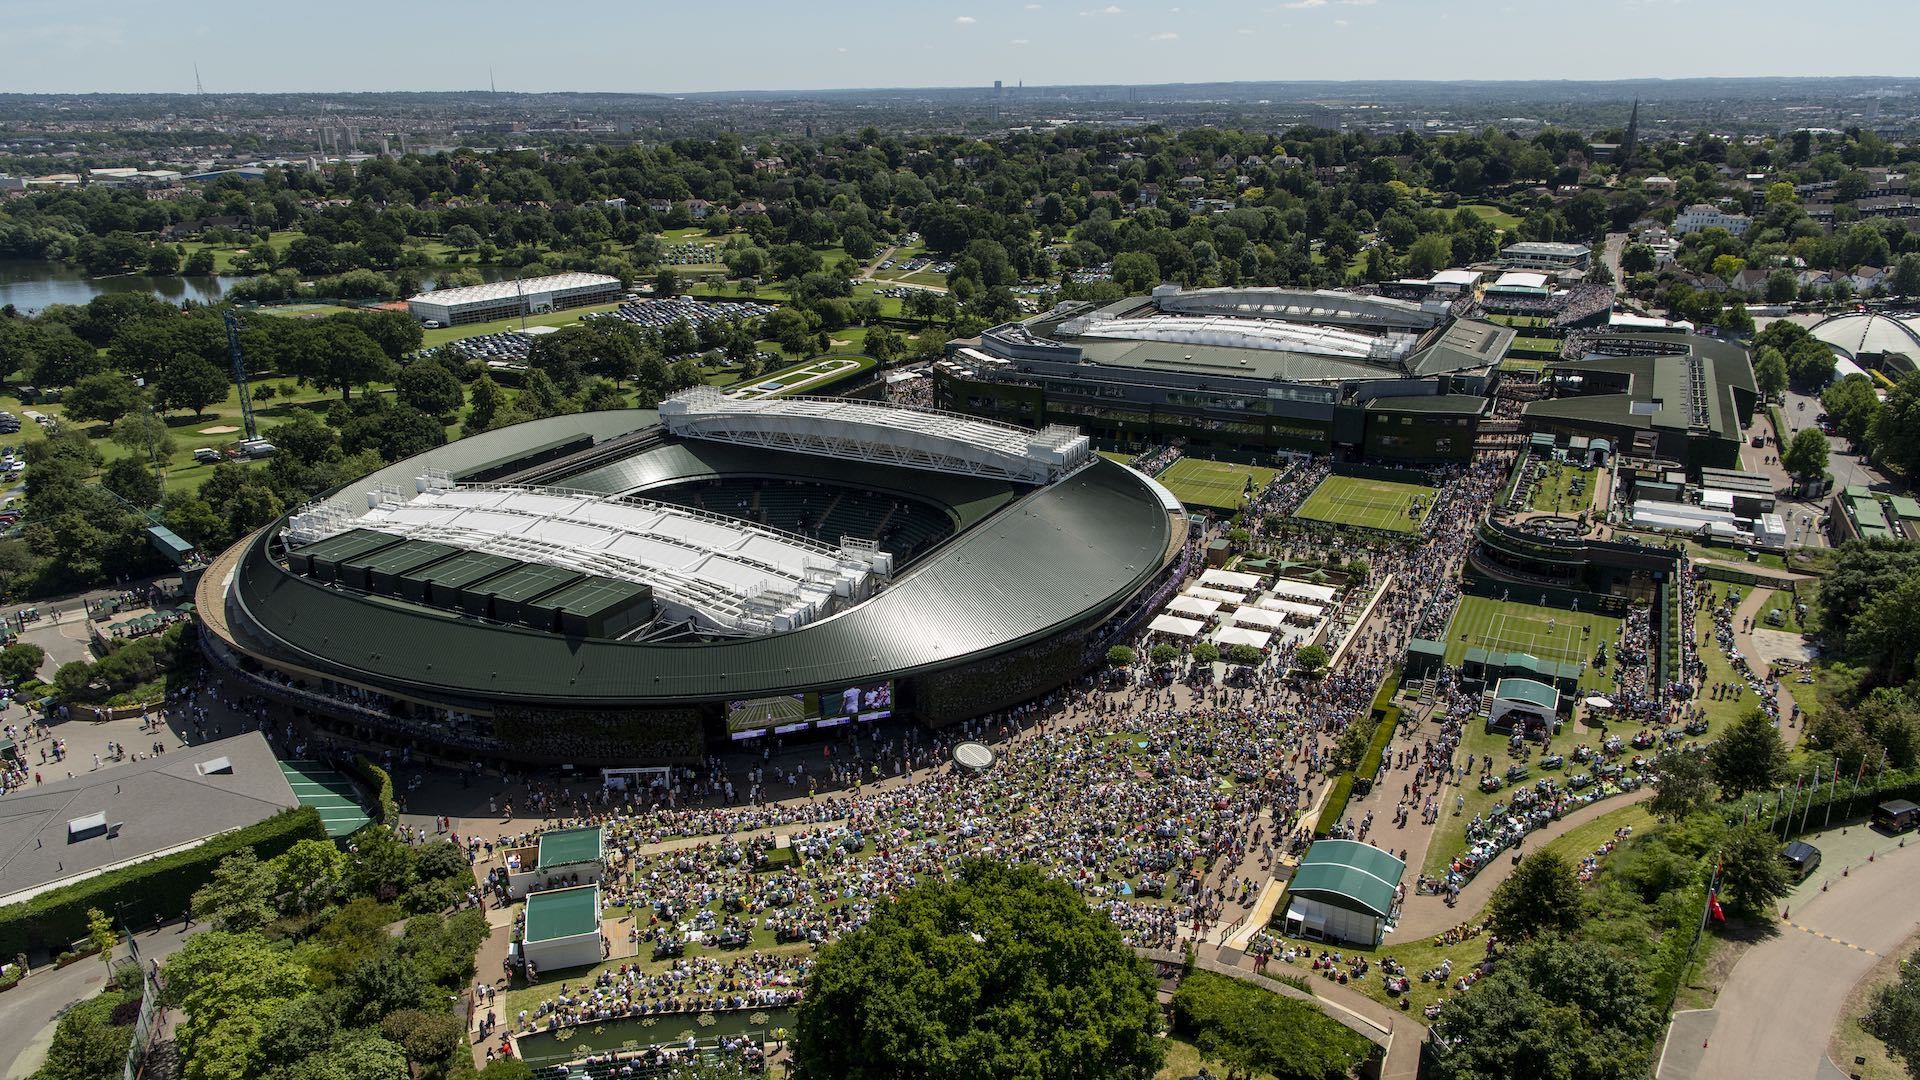 Why Wimbledon Leaves $75 Million On The Table